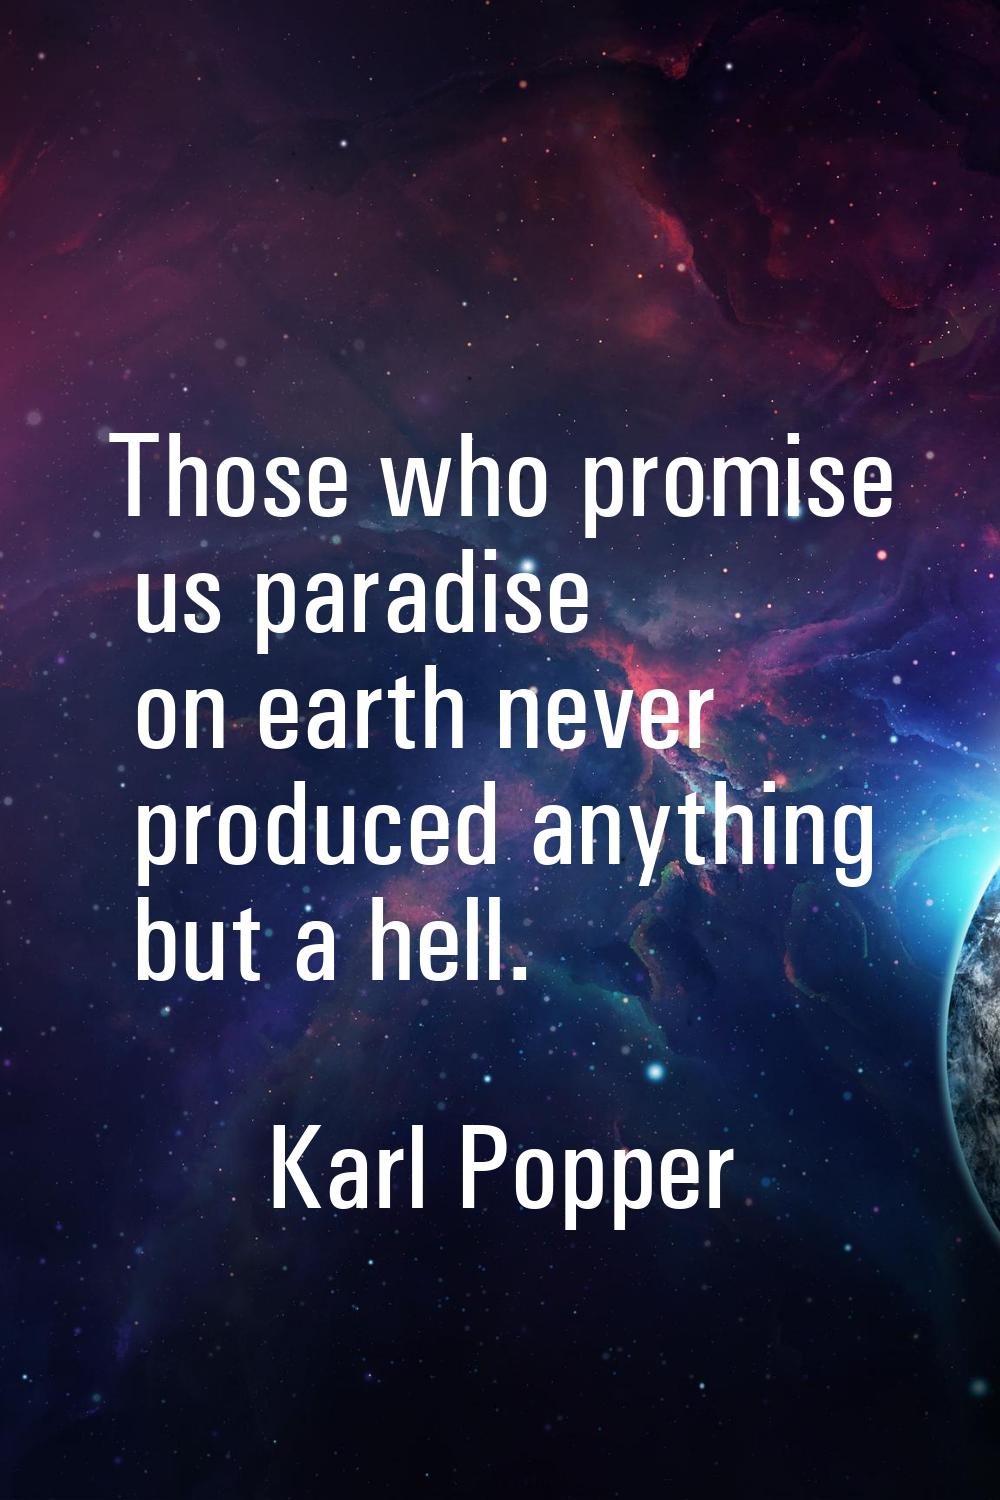 Those who promise us paradise on earth never produced anything but a hell.